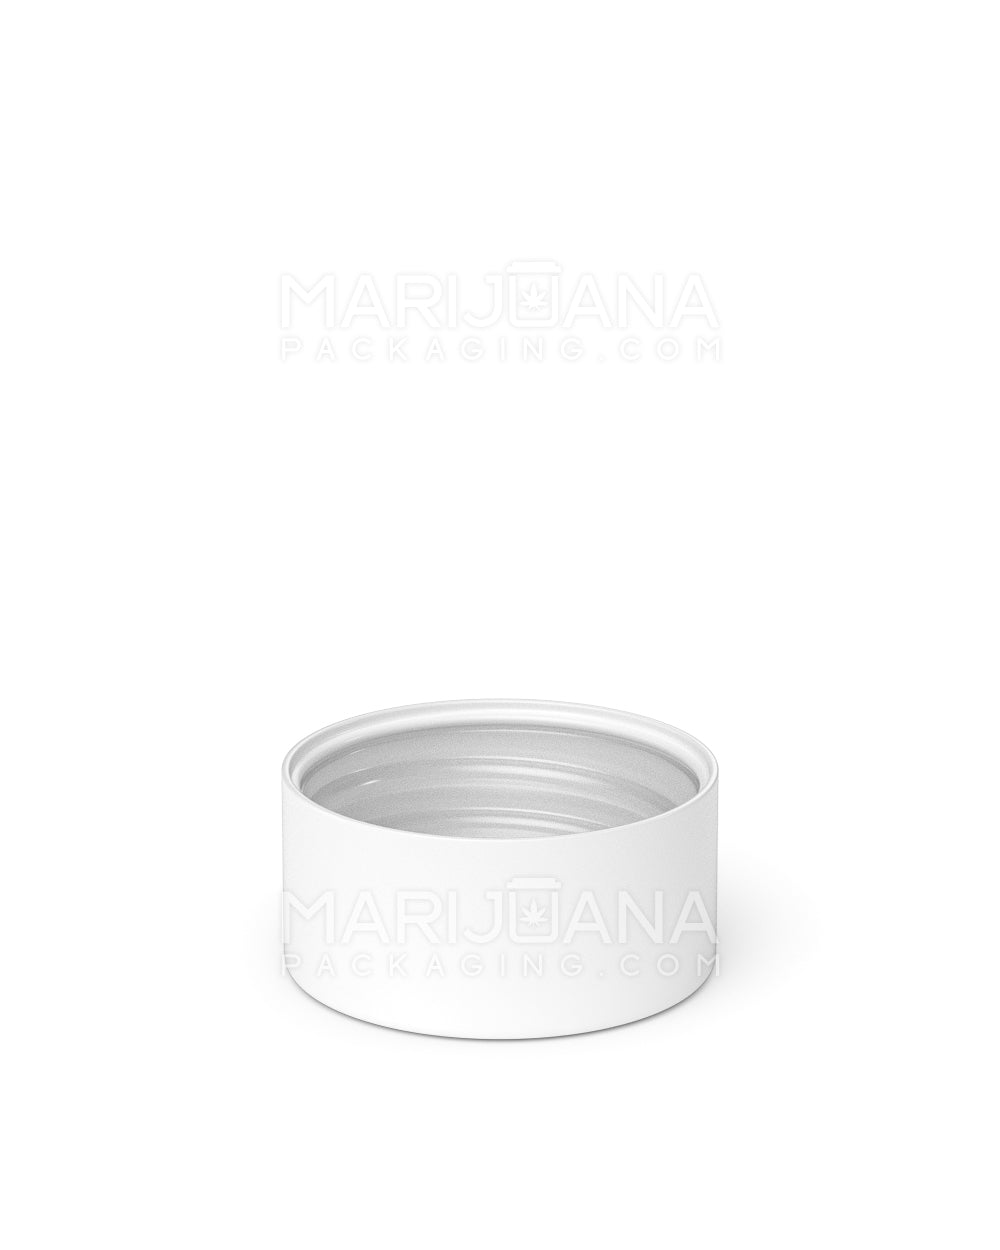 Child Resistant | Smooth Push Down & Turn Plastic Caps w/ Foil Liner | 28mm - Matte White - 504 Count - 4